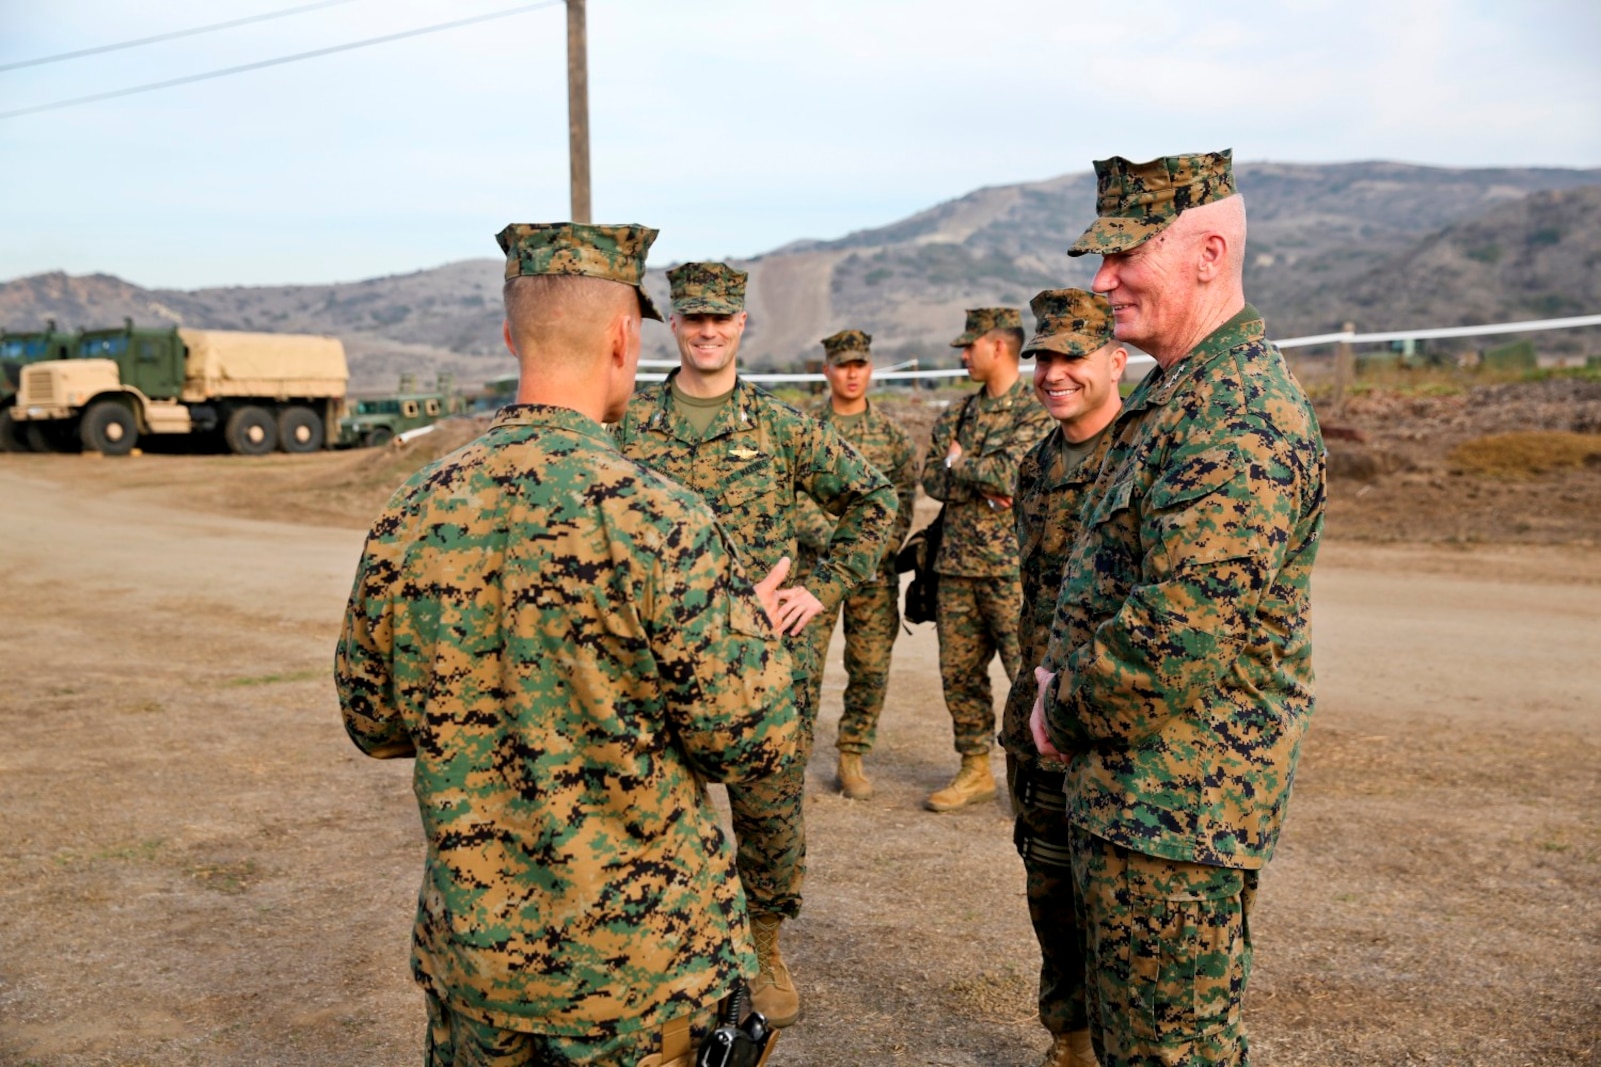 Brig. Gen. Carl E. Mundy, commanding general of 1st Marine Expeditionary Brigade, greets Lt. Gen. John A. Toolan, commanding general of I Marine Expeditionary Force, at the gate of a MEB command post during an exercise aboard Camp Pendleton, Calif., Feb. 11. Toolan toured the command operations center and other elements of the Brigade Headquarters Group supporting the needs of the MEB.